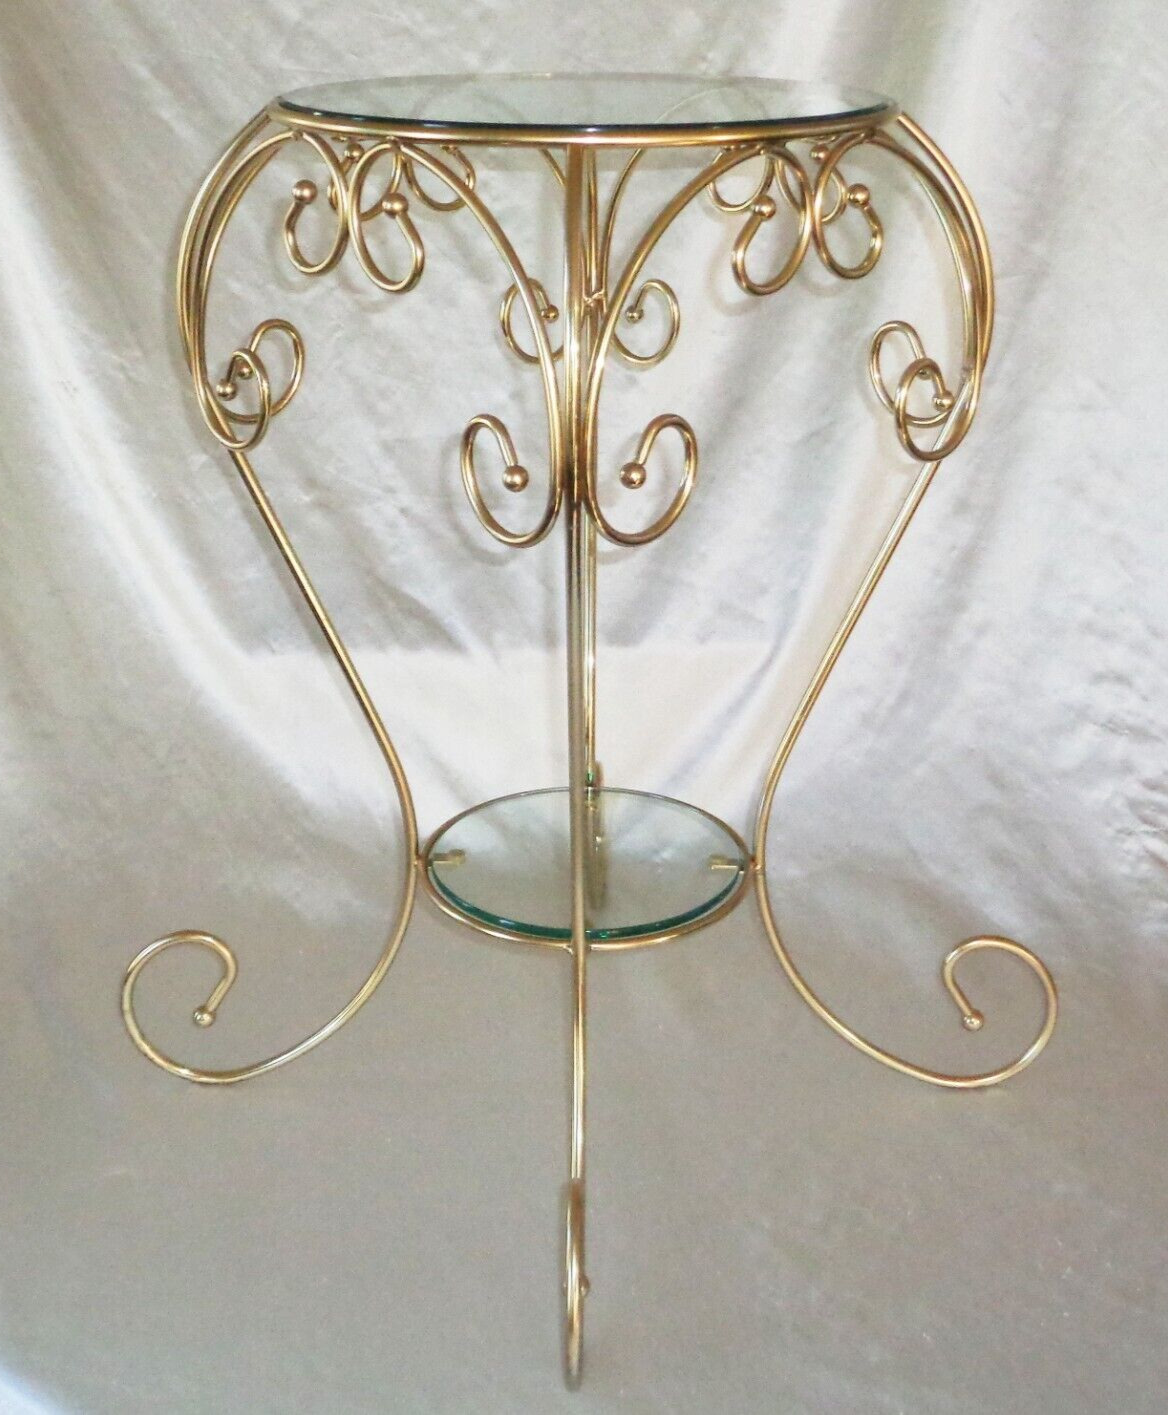 2-Tier Glass Iron Rod French Revival Etagere End Table Plant Stand Retro Vintage